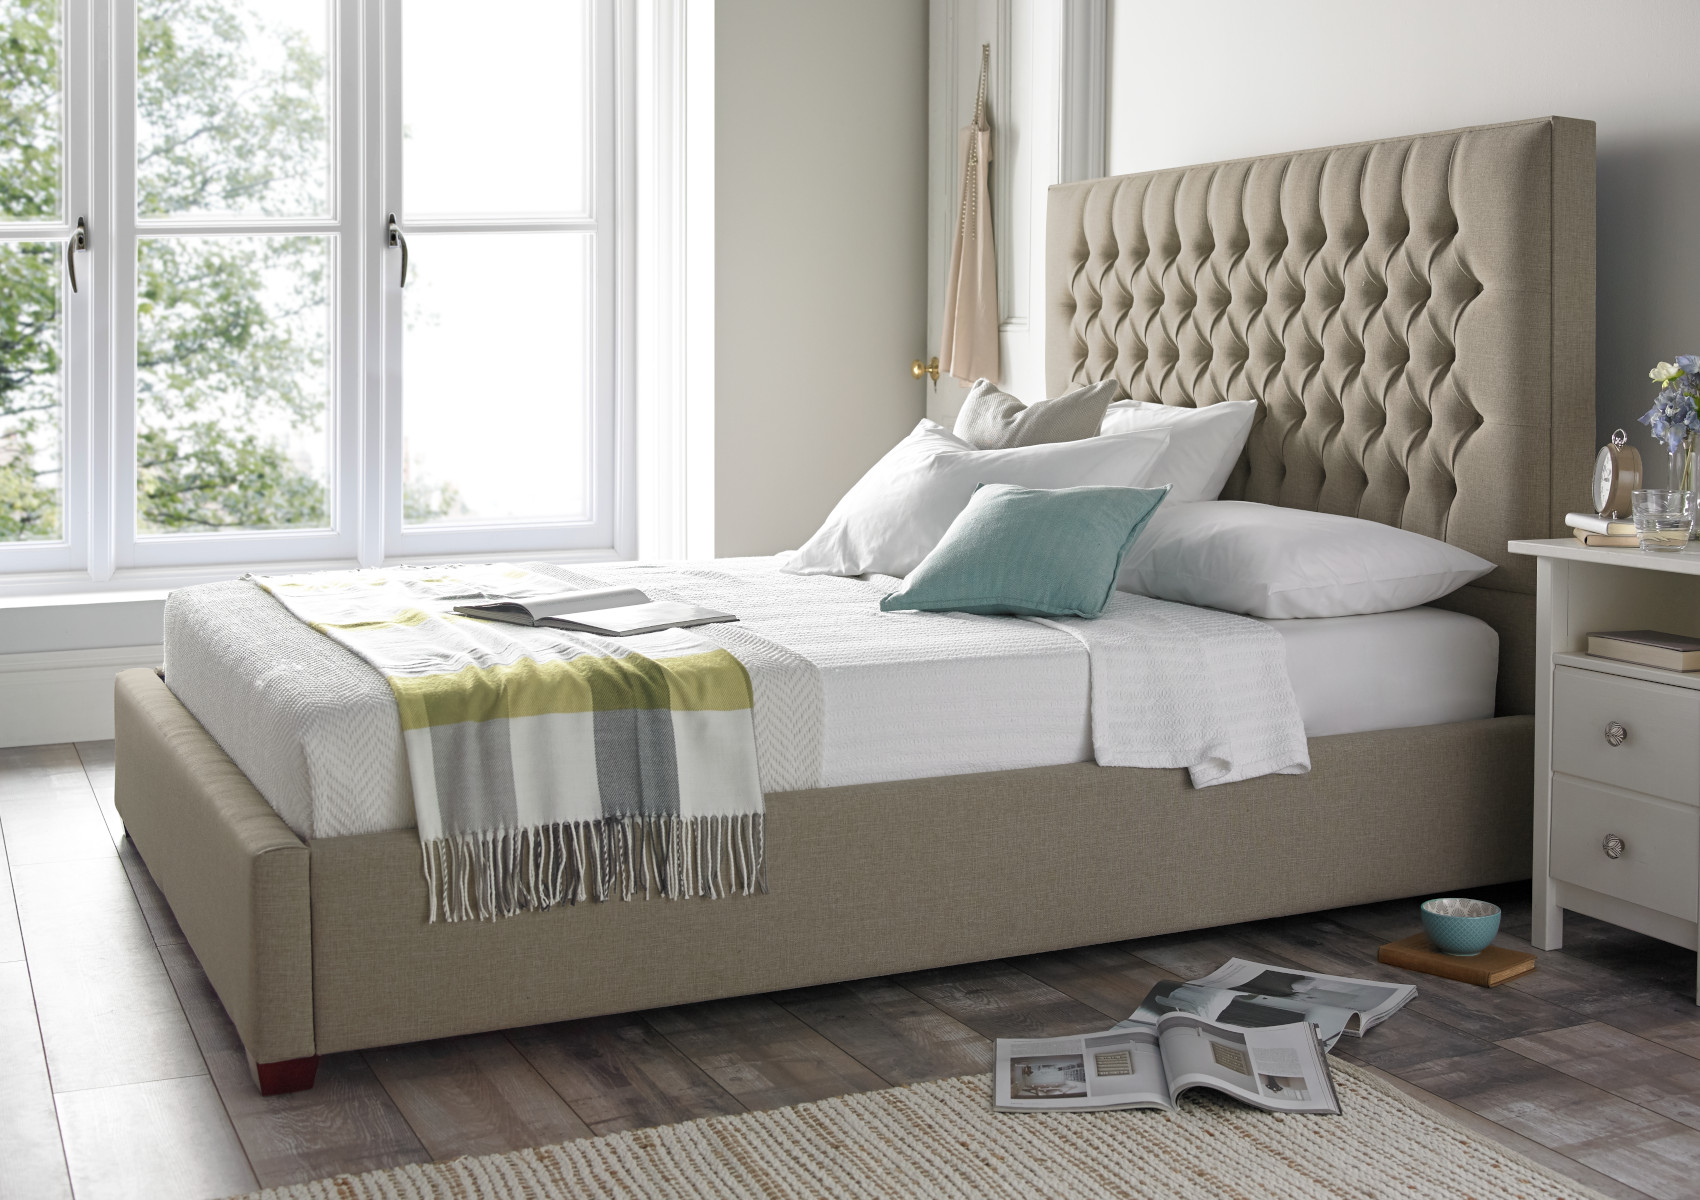 View Belgravia Naples Mink Upholstered Compact Double Bed Time4Sleep information